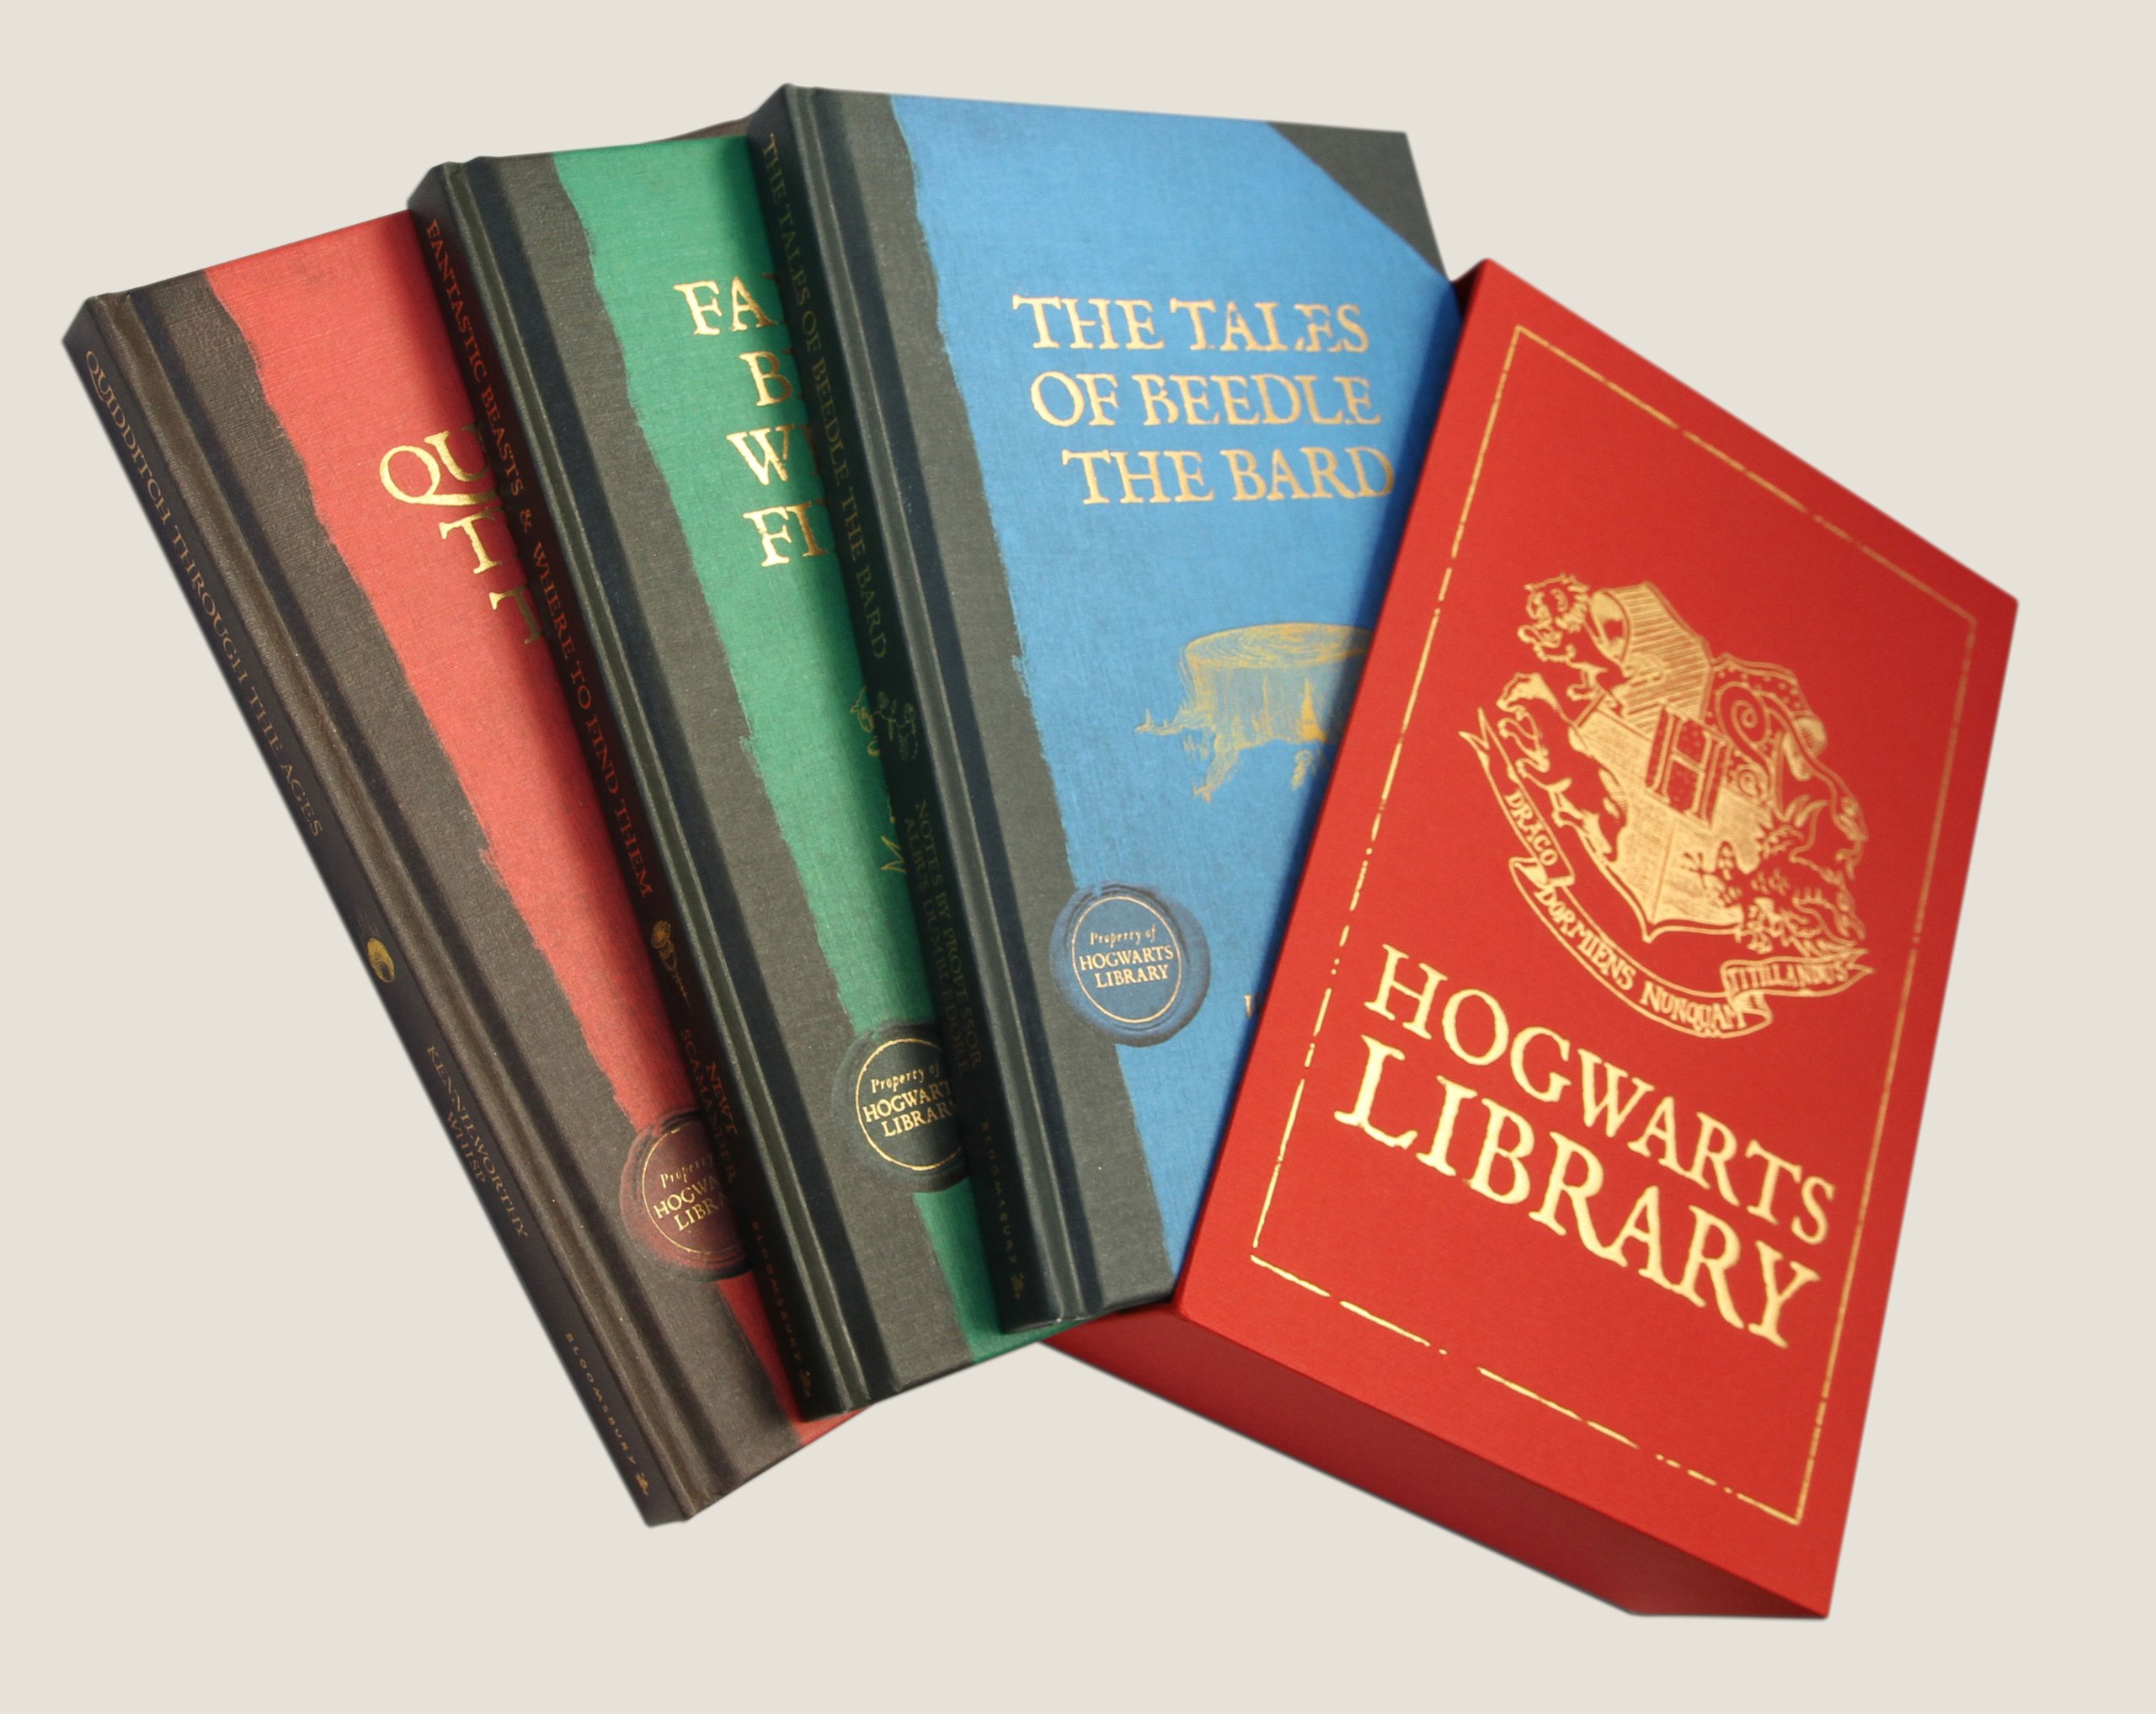 Are the Harry Potter books available in libraries?